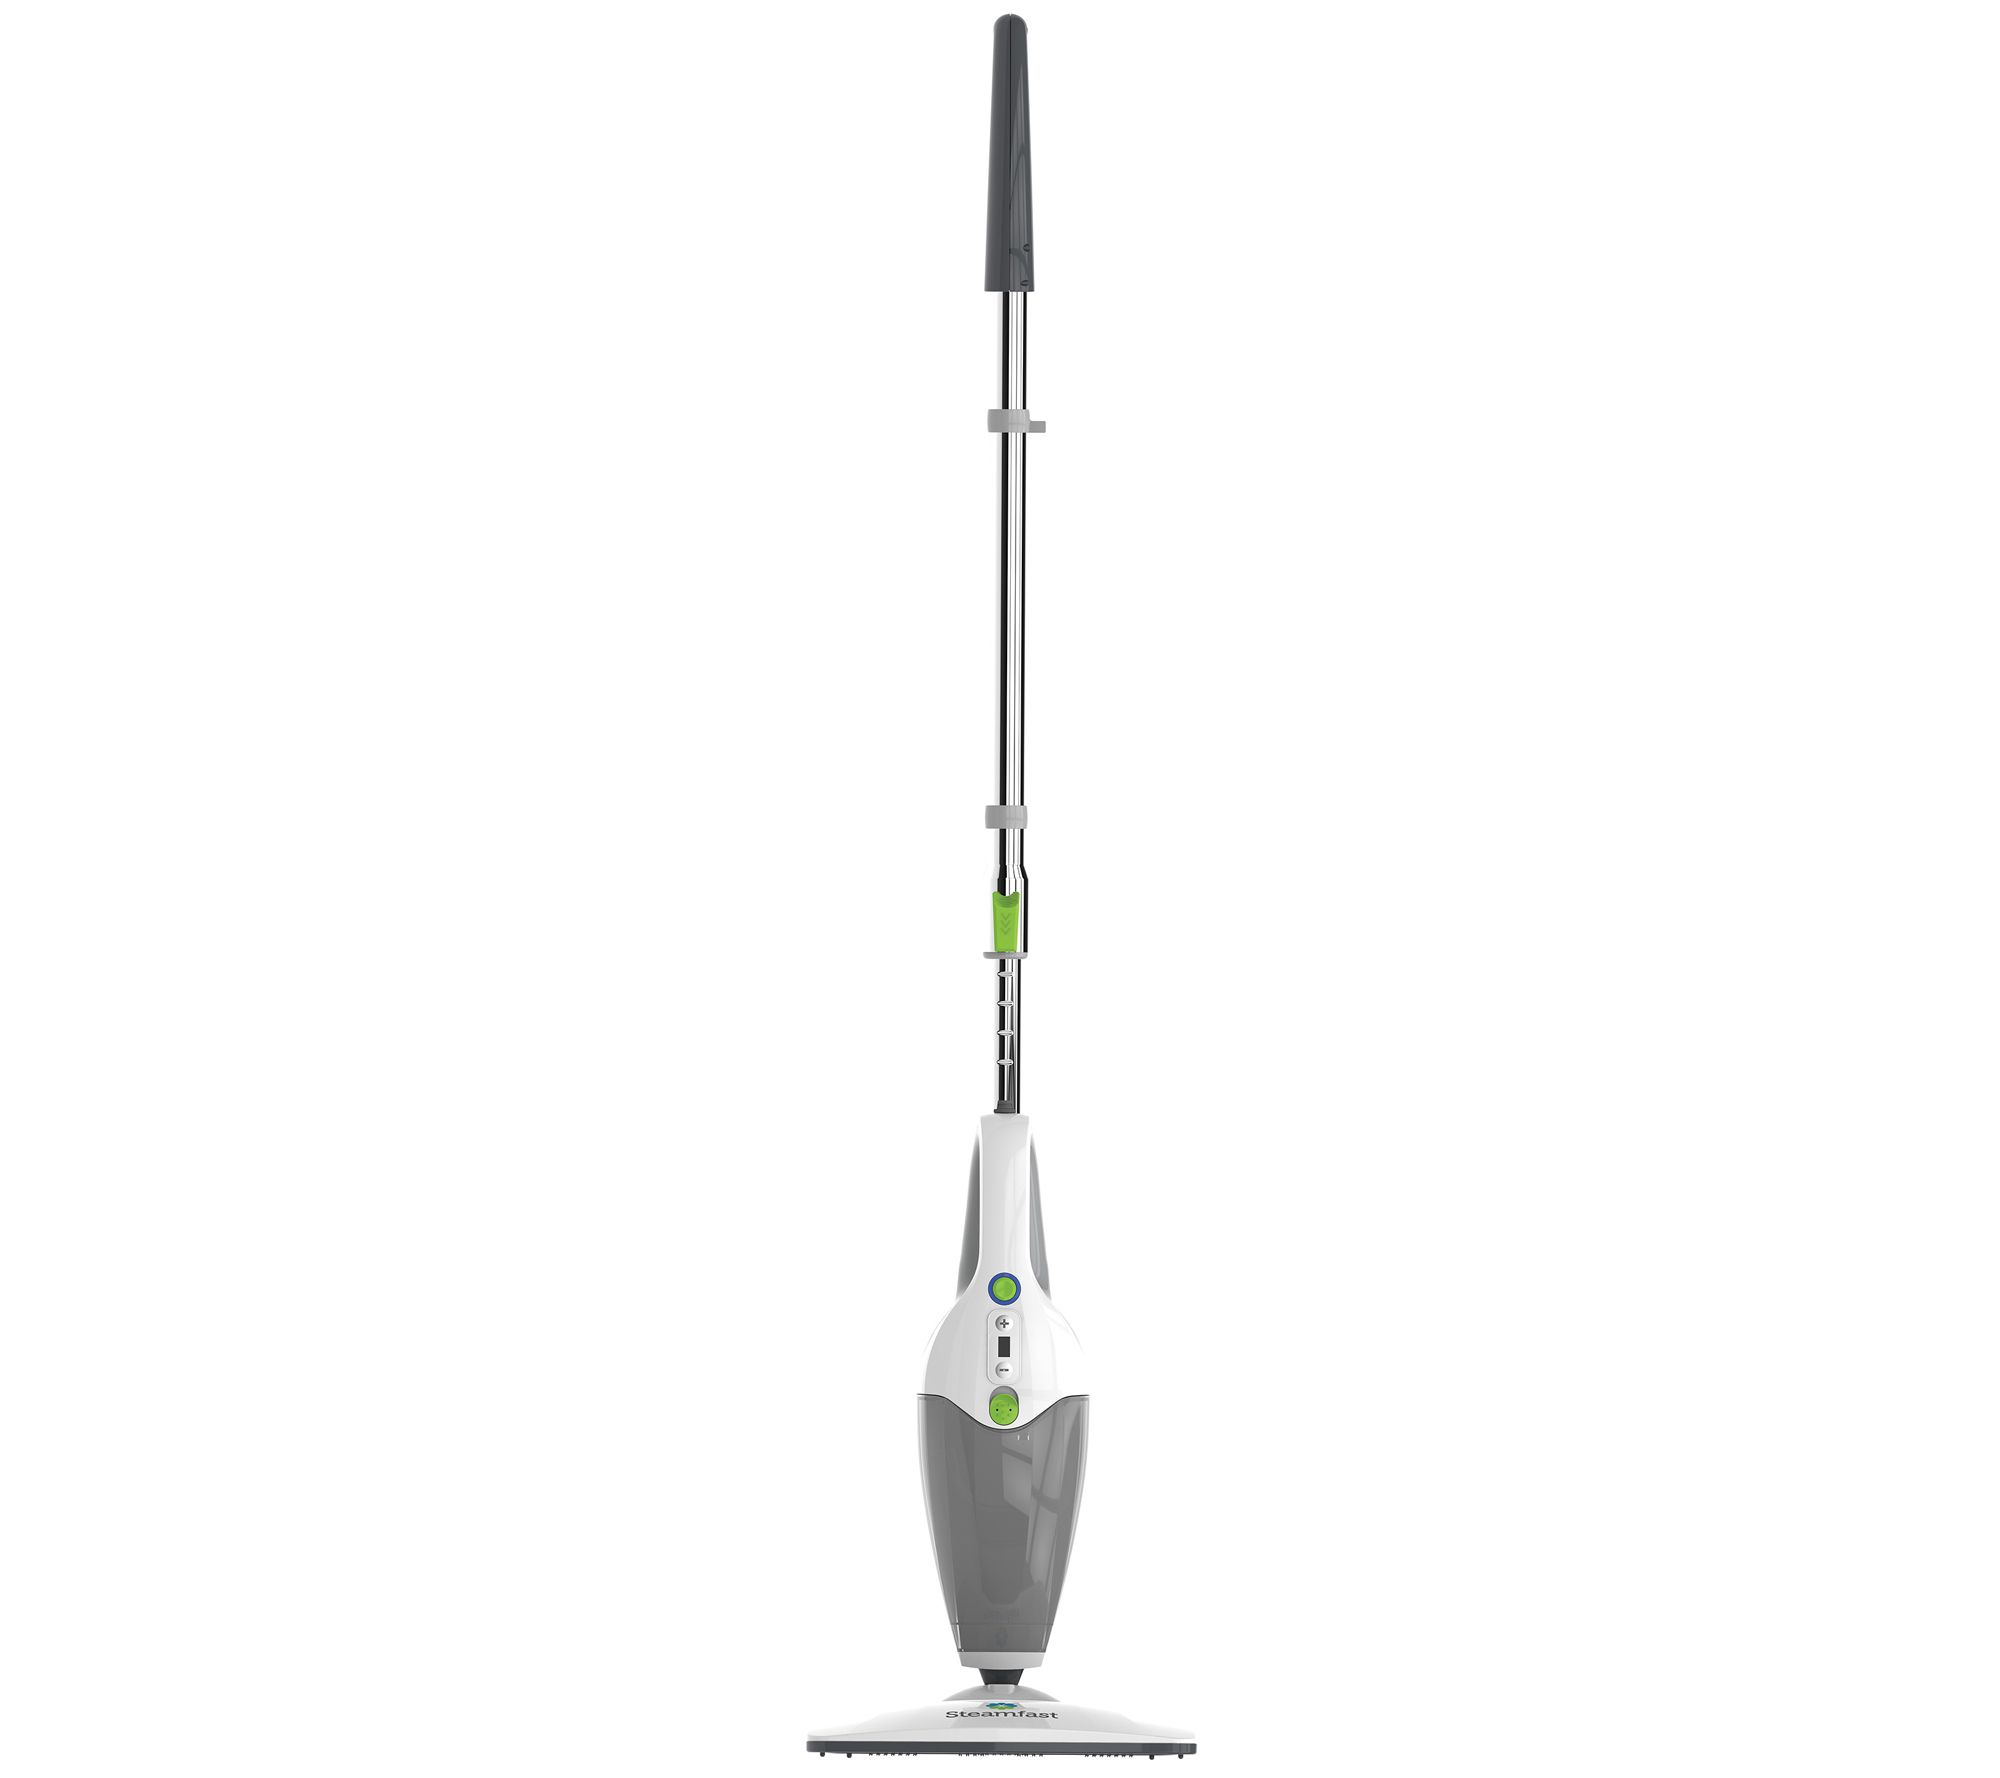 Steamfast SF-370WH Steam Cleaner Review: Steam It Away